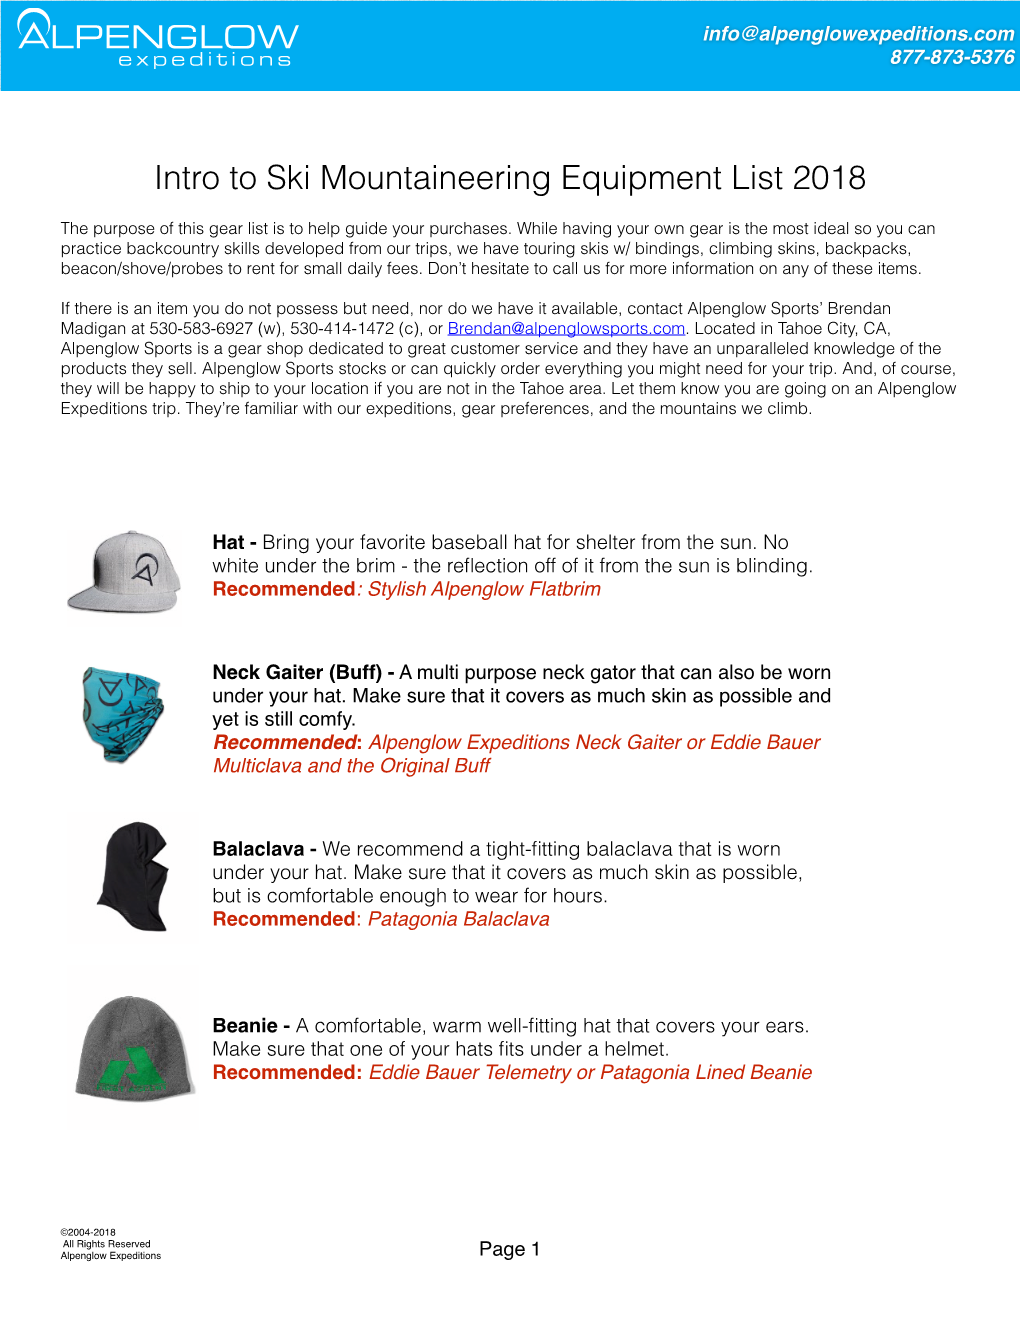 Intro to Ski Mountaineering Equip List 2018 Copy.Pages